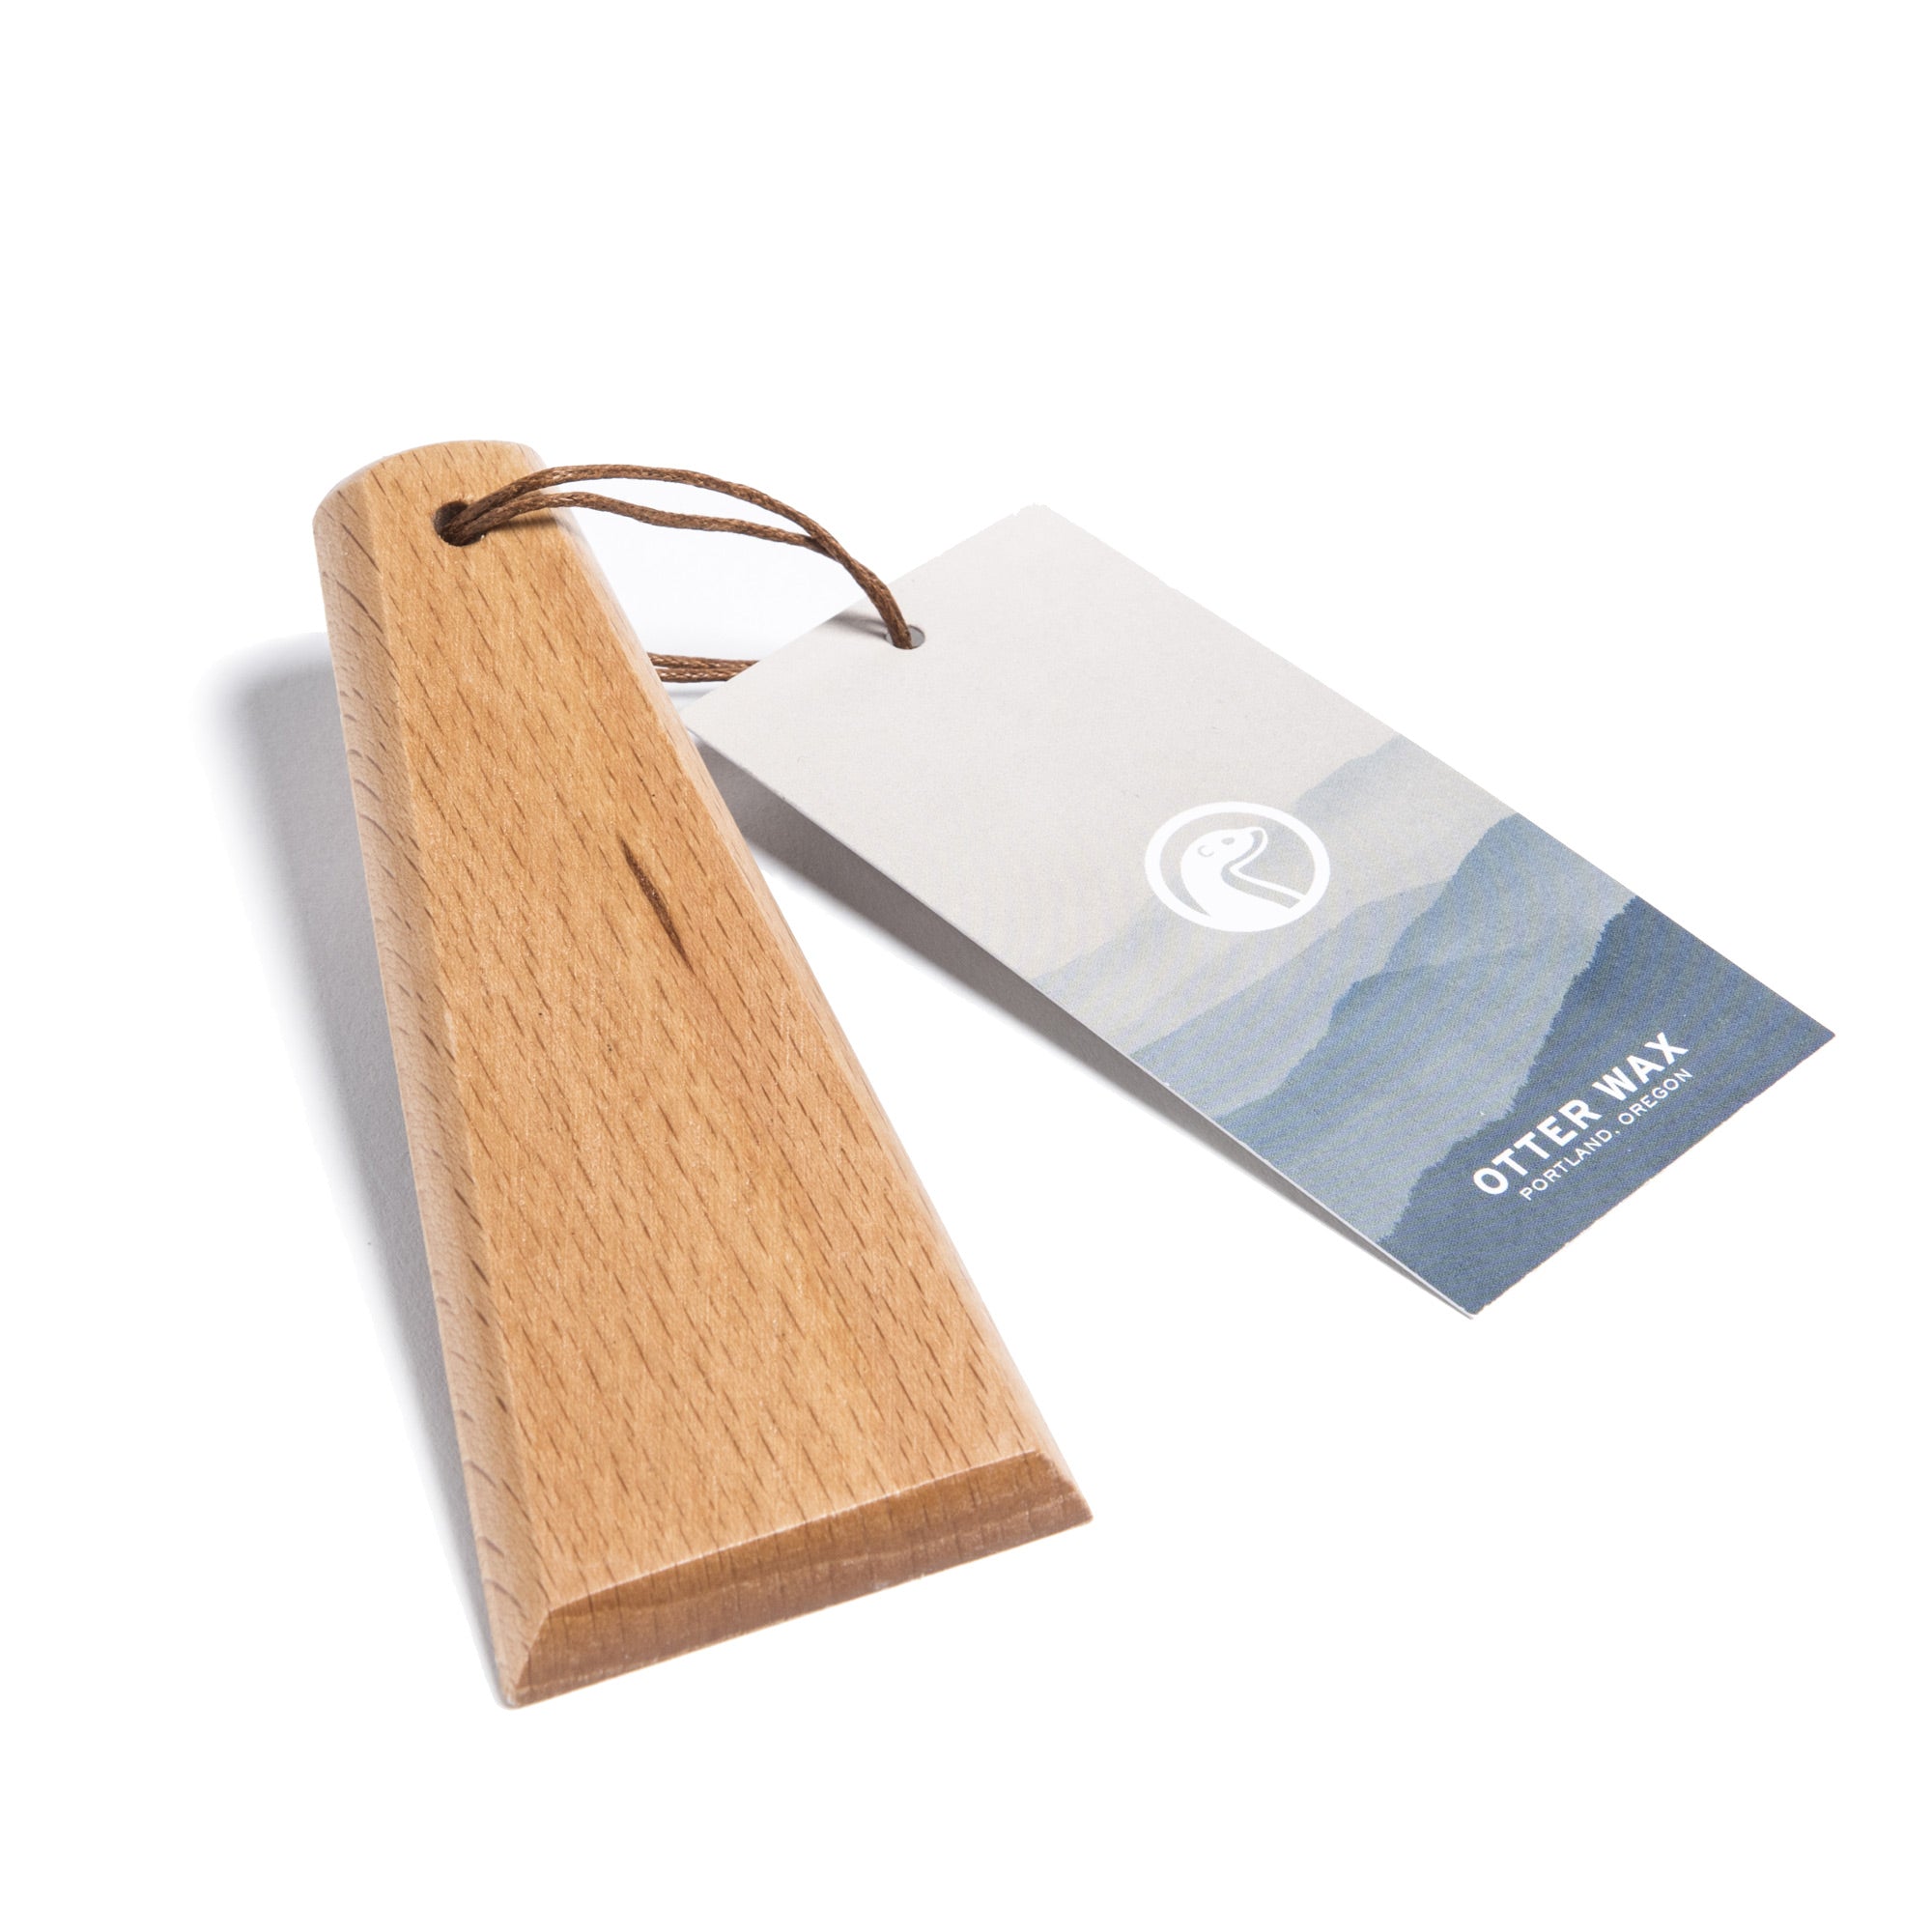 Otter Wax Waxed Canvas Wood Smoothing Tool For Waxing Tincloth Oilcloth And Canvas Fabrics And Waterproofing